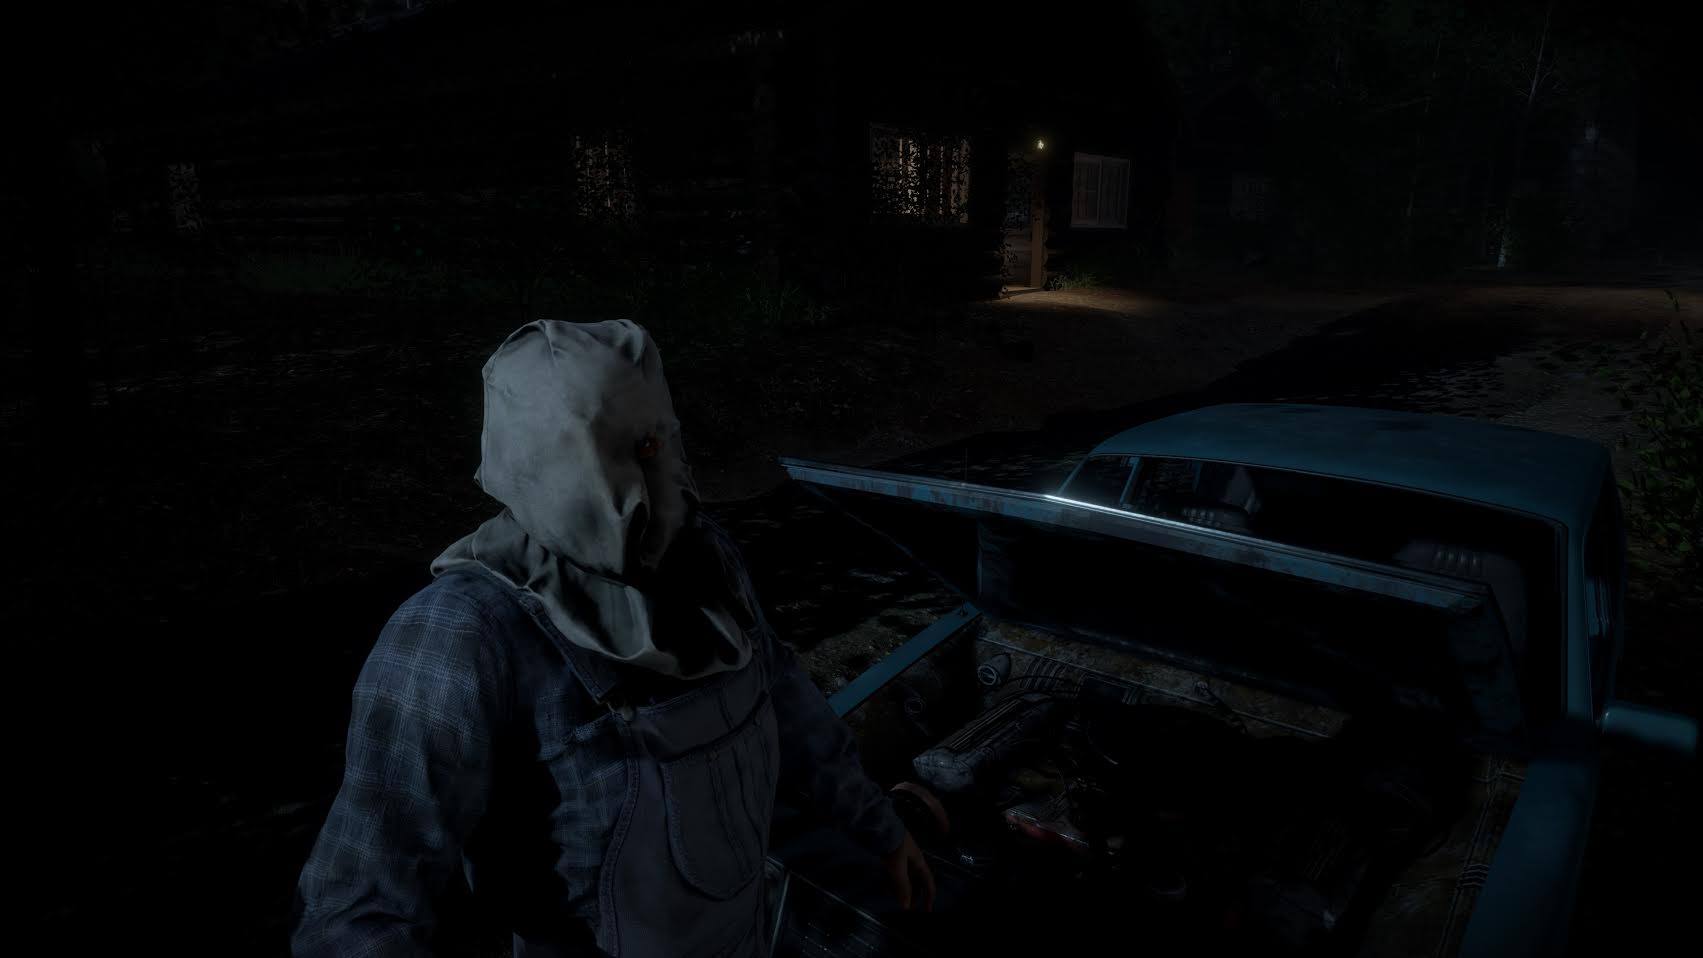 Friday The 13th Game on X: We're almost there Get ready to take Camp  Crystal Lake everywhere with you on August 13th when Friday the 13th: The  Game launches on Switch!  /